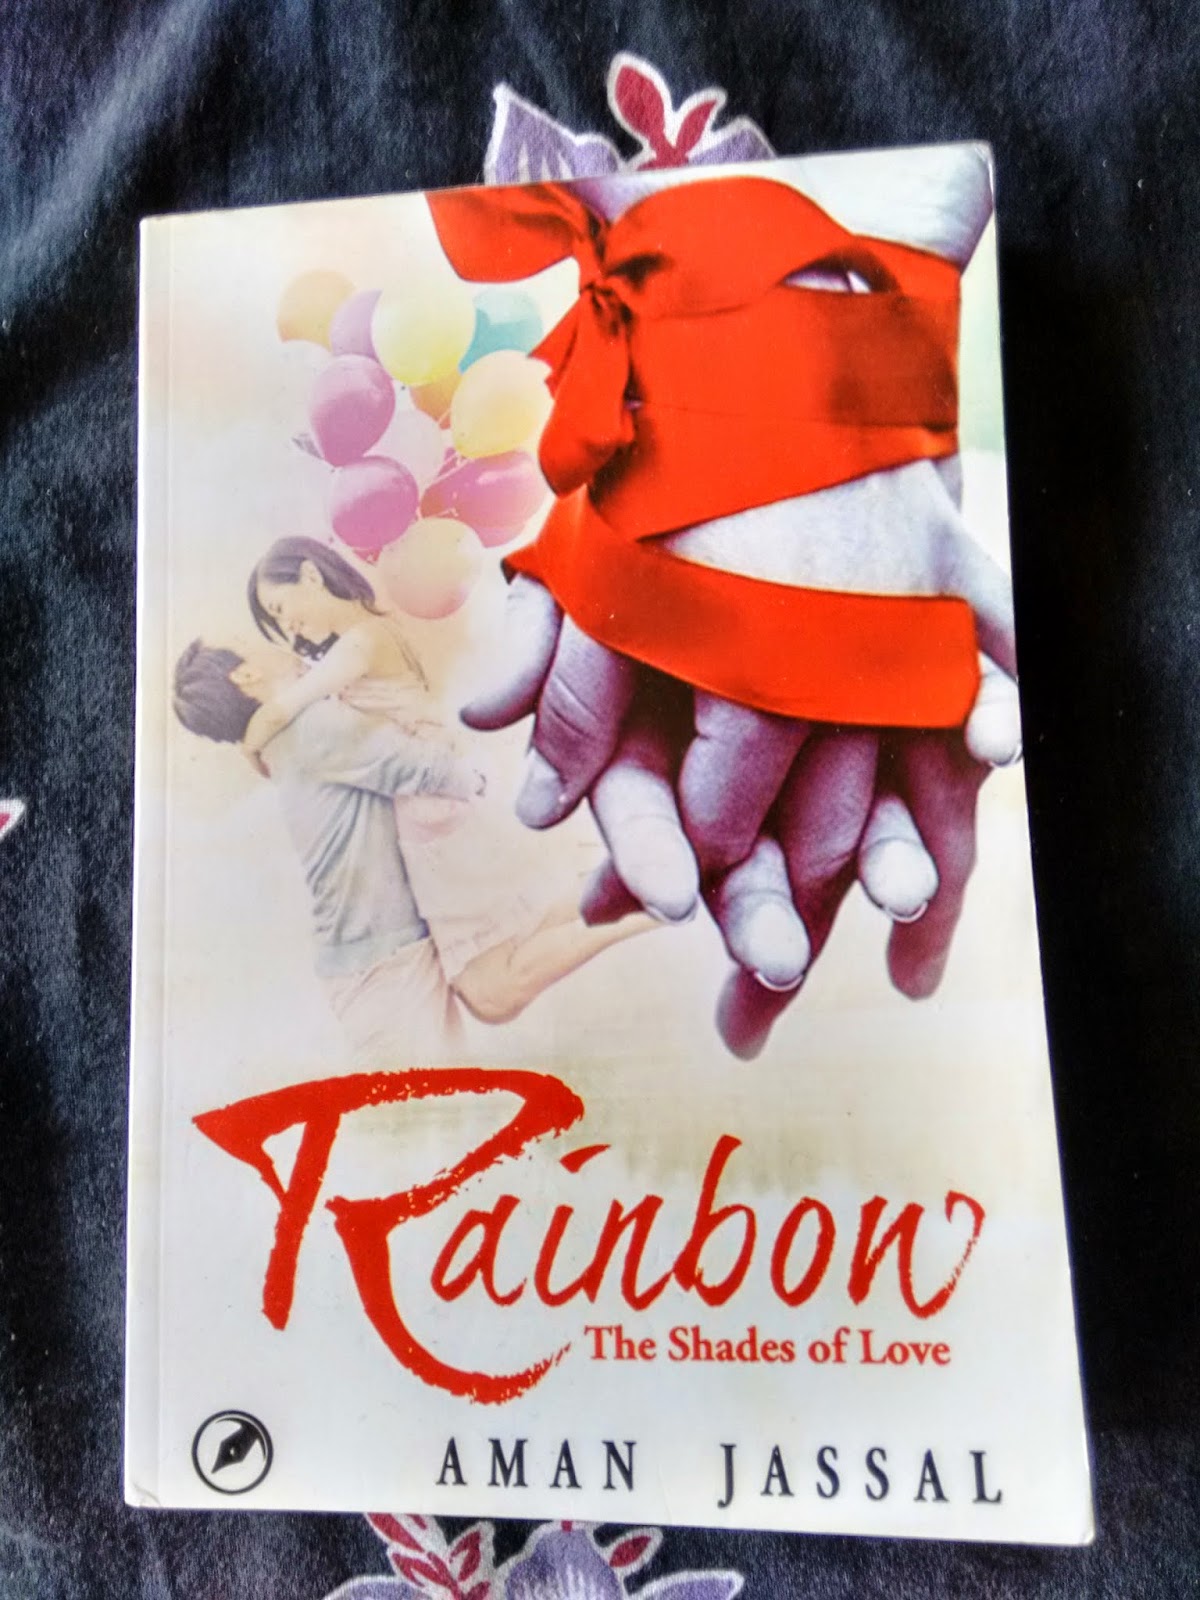  Book Review: Rainbow, The Shades of Love by Aman Jassal